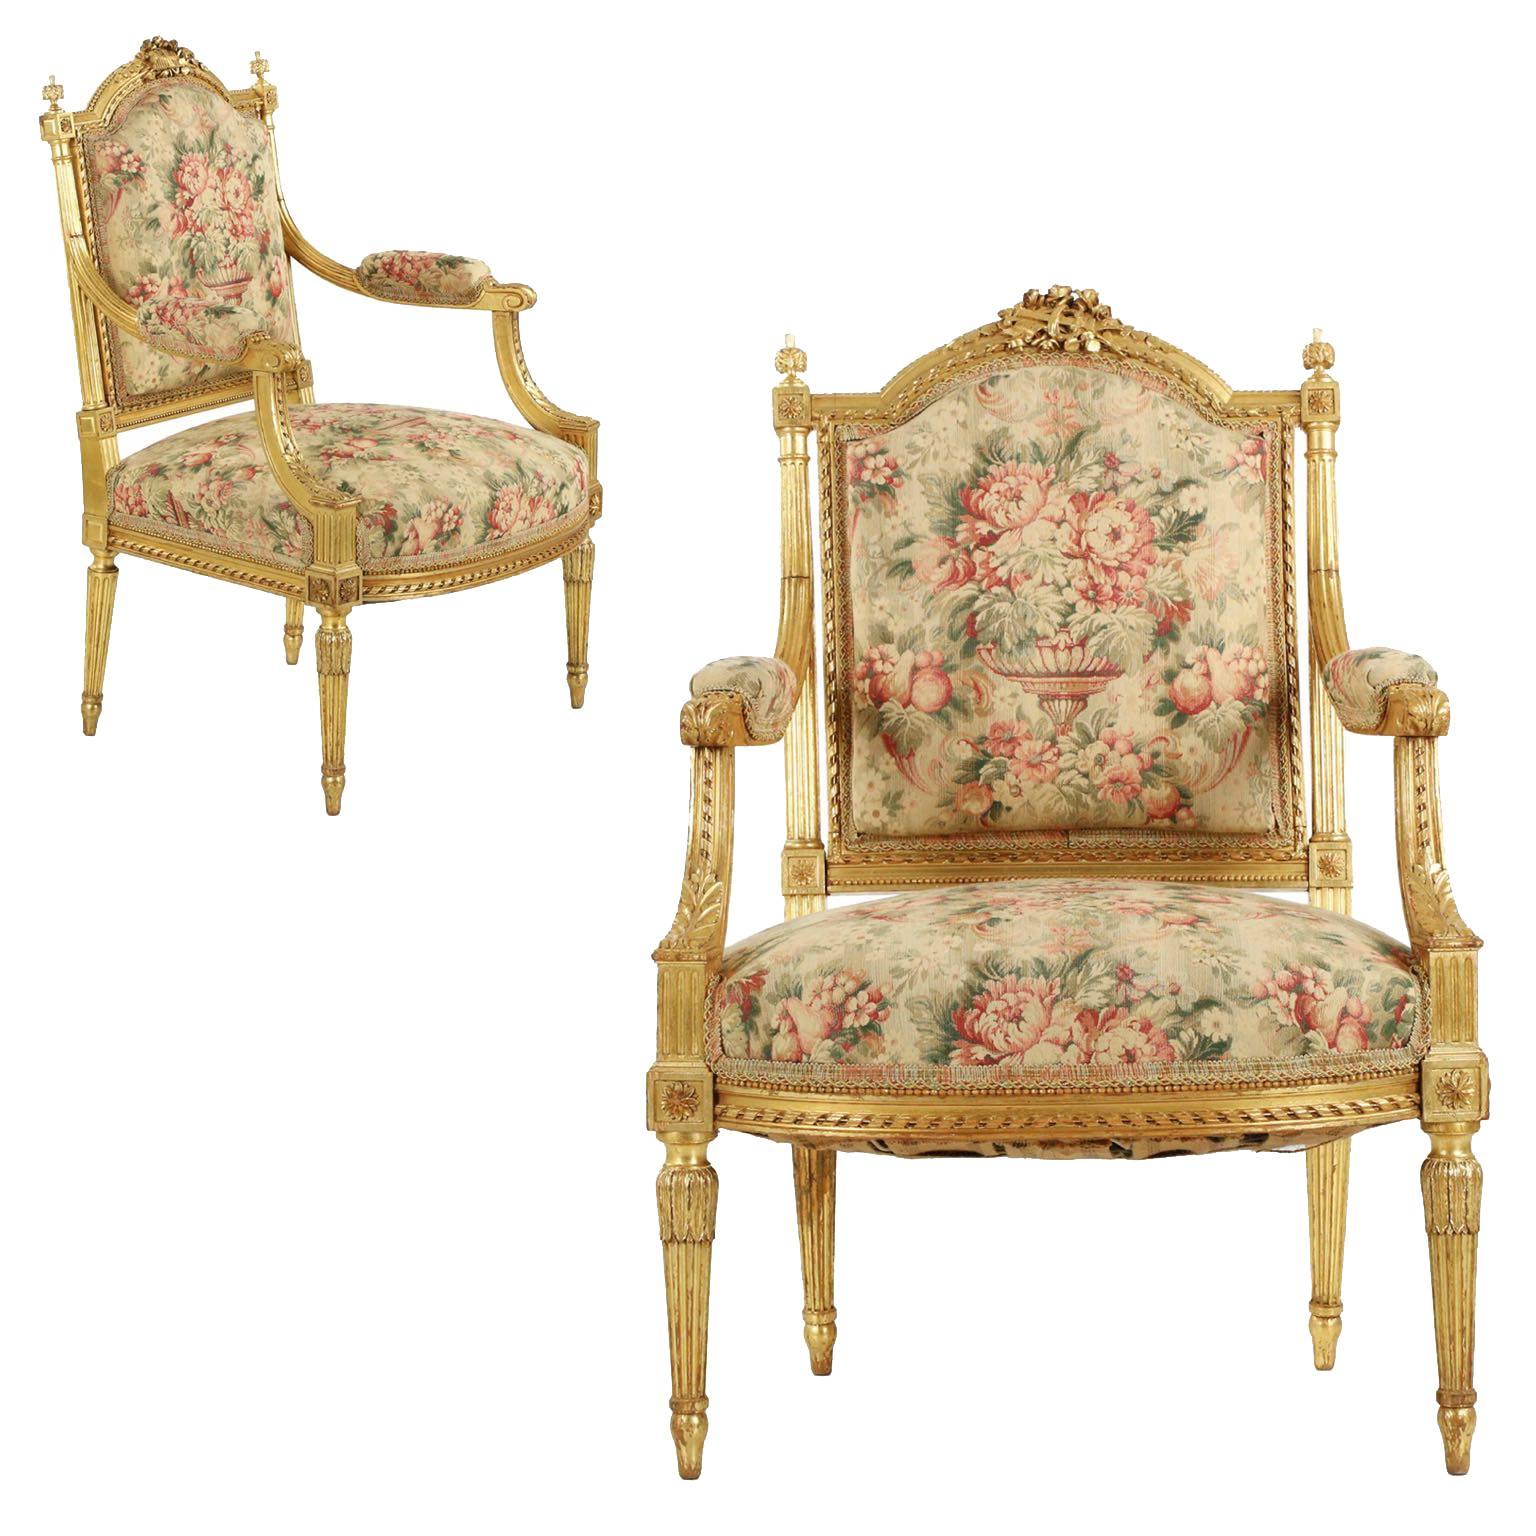 Finely Carved Pair of Louis XVI Style Giltwood Fauteuils, circa 1900